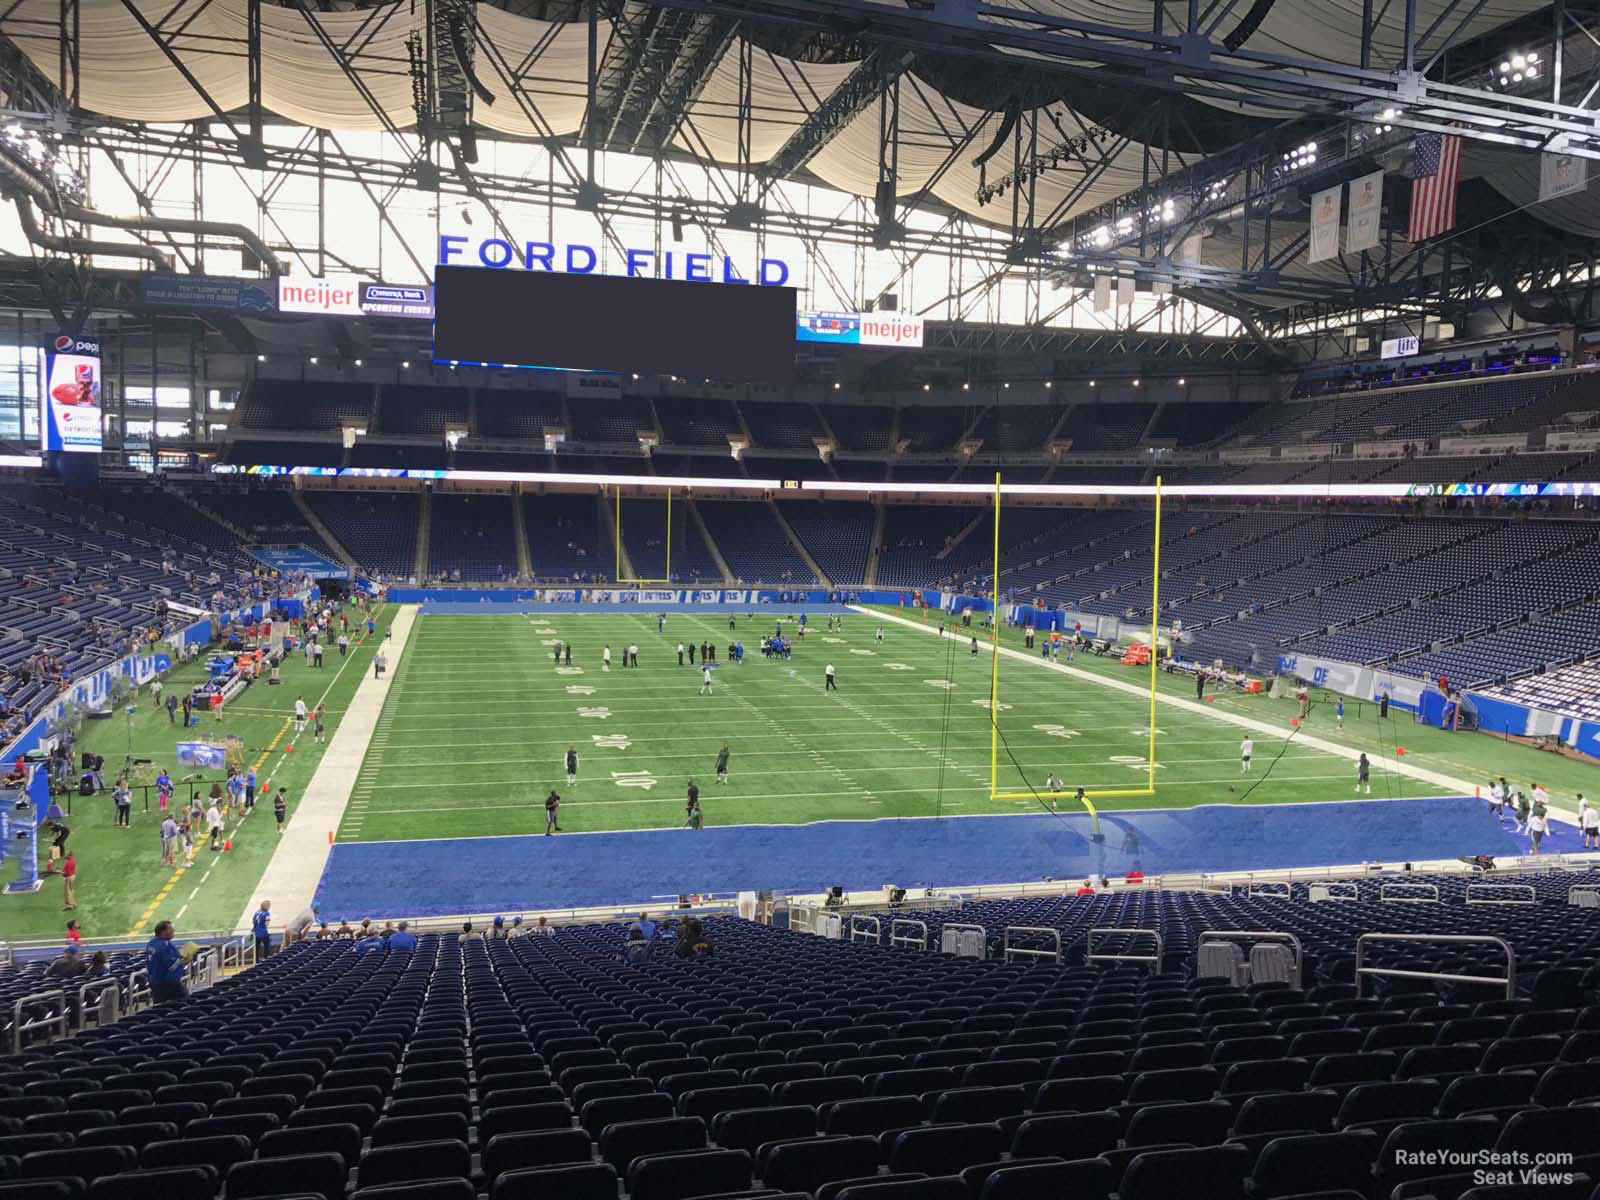 section 115, row 33 seat view  for football - ford field